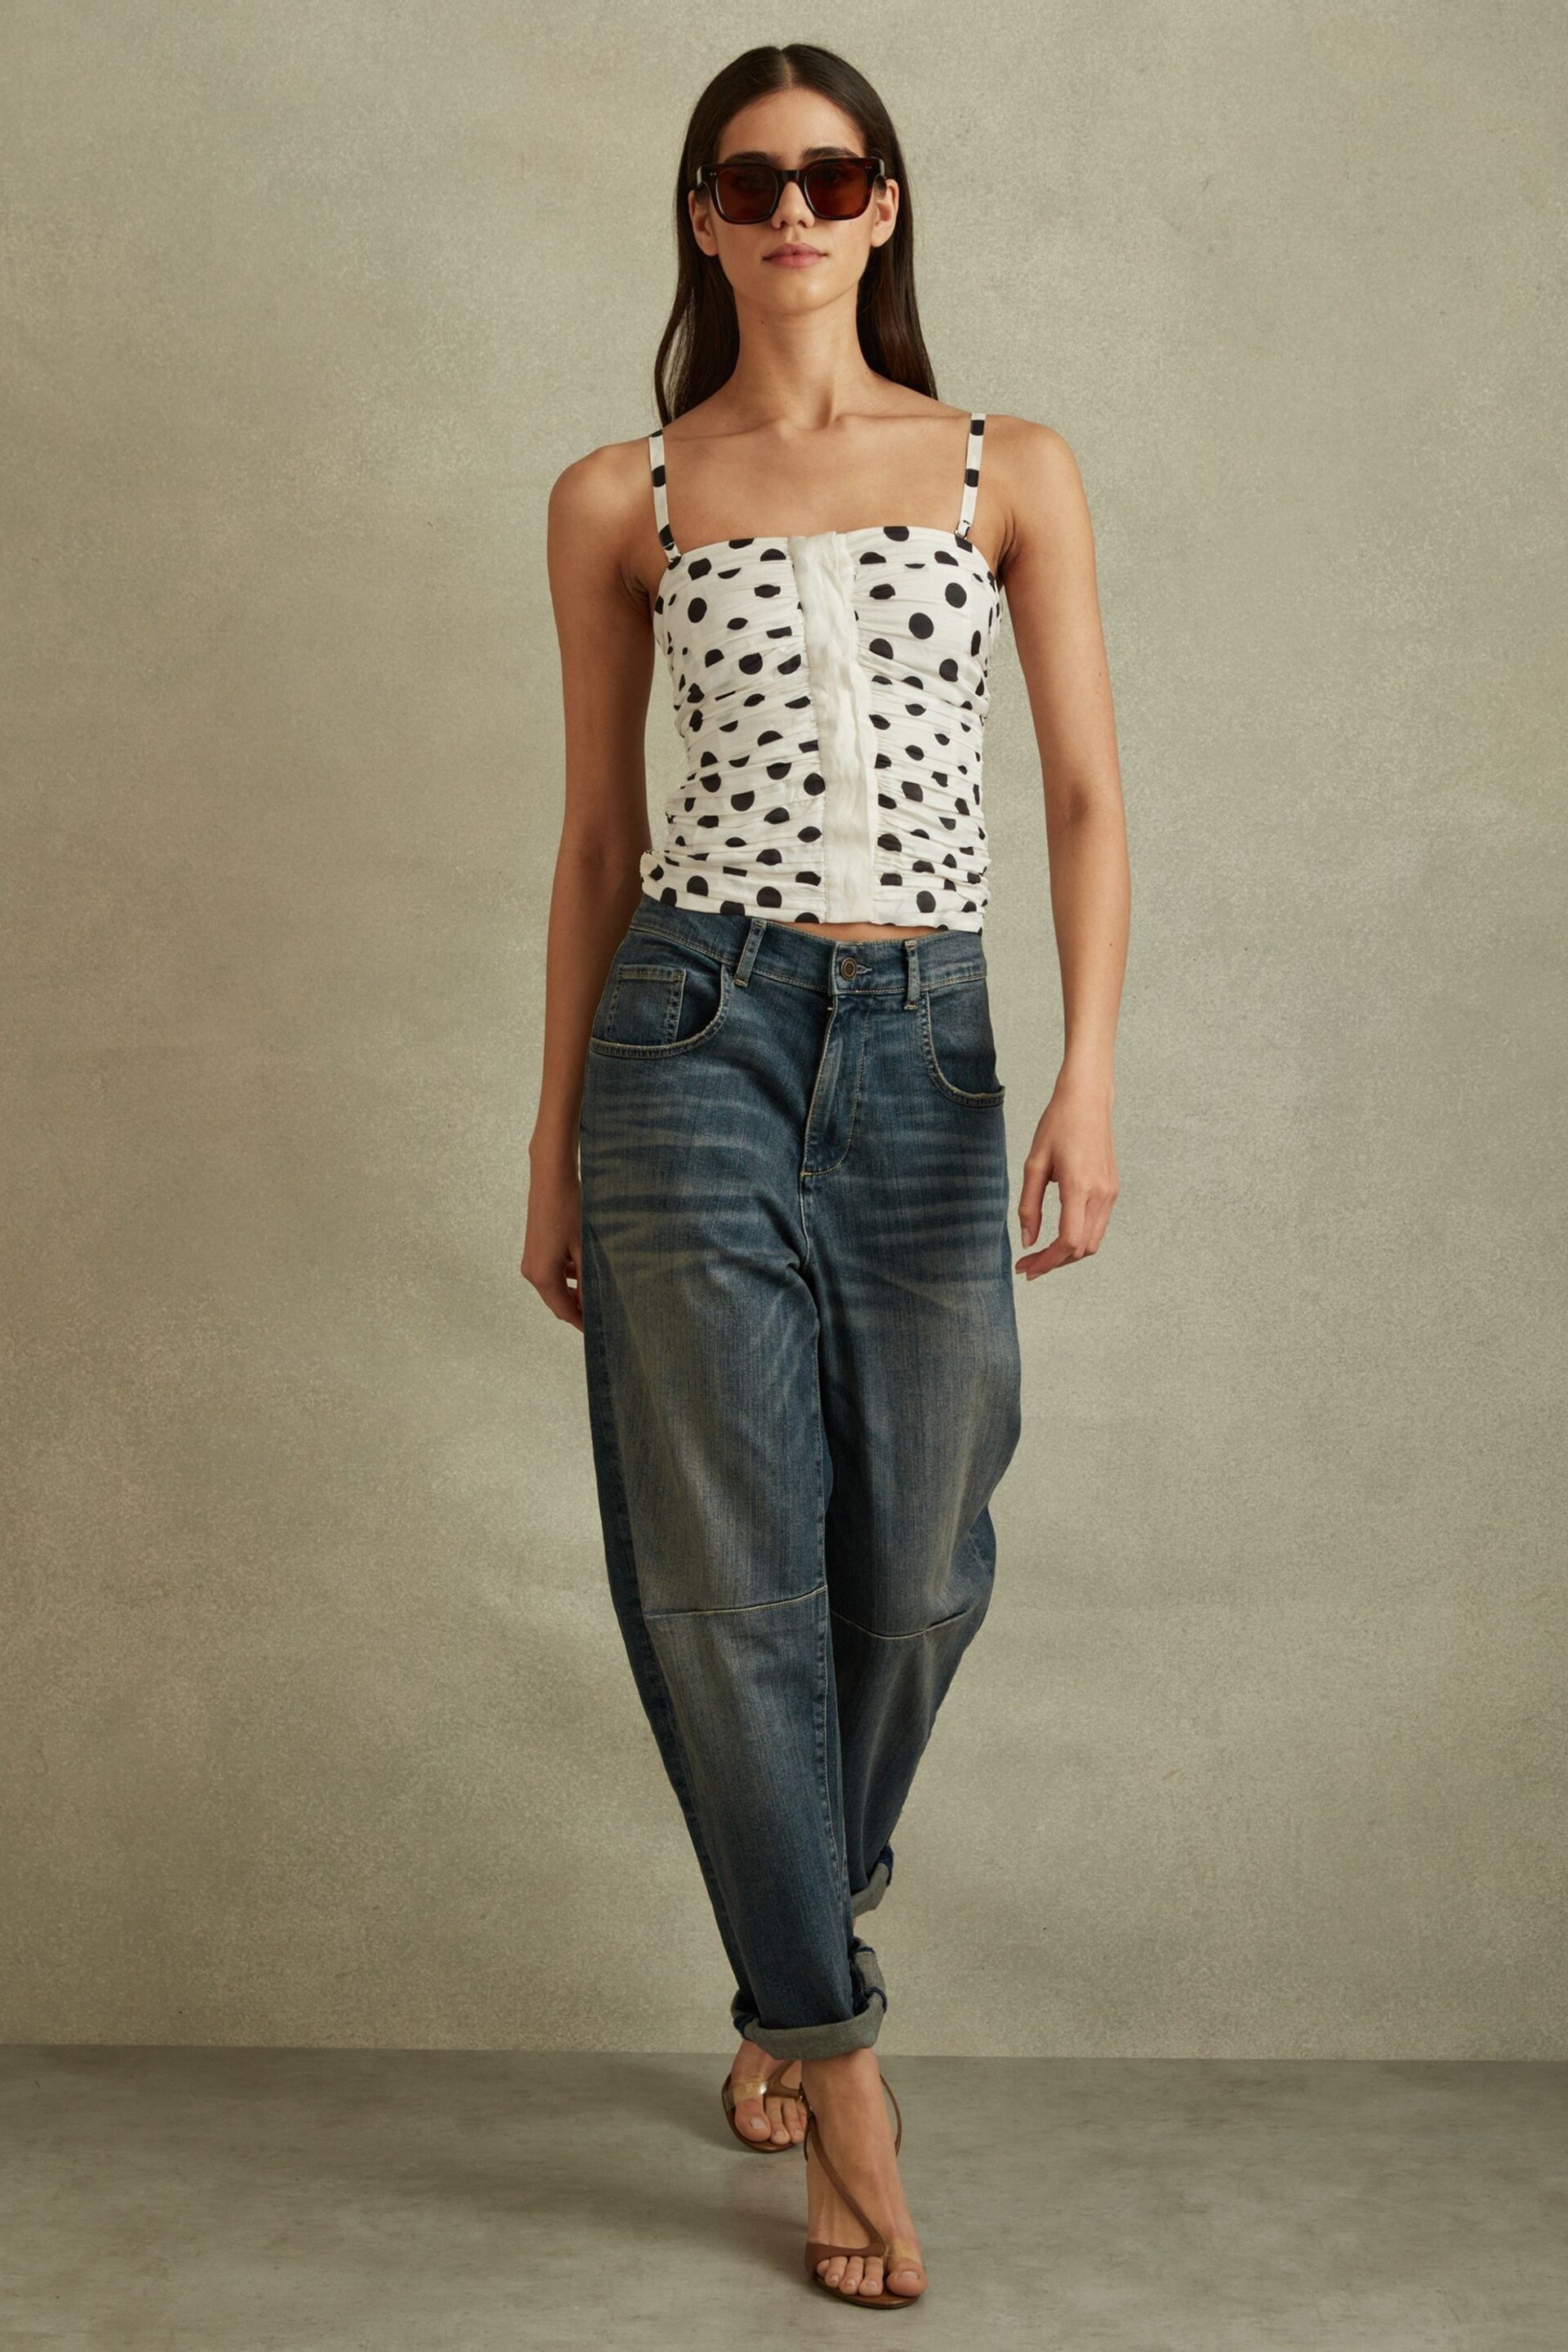 Reiss White/Black Remie Viscose Linen Polka Dot Ruched Strapless Top - Image 1 of 6